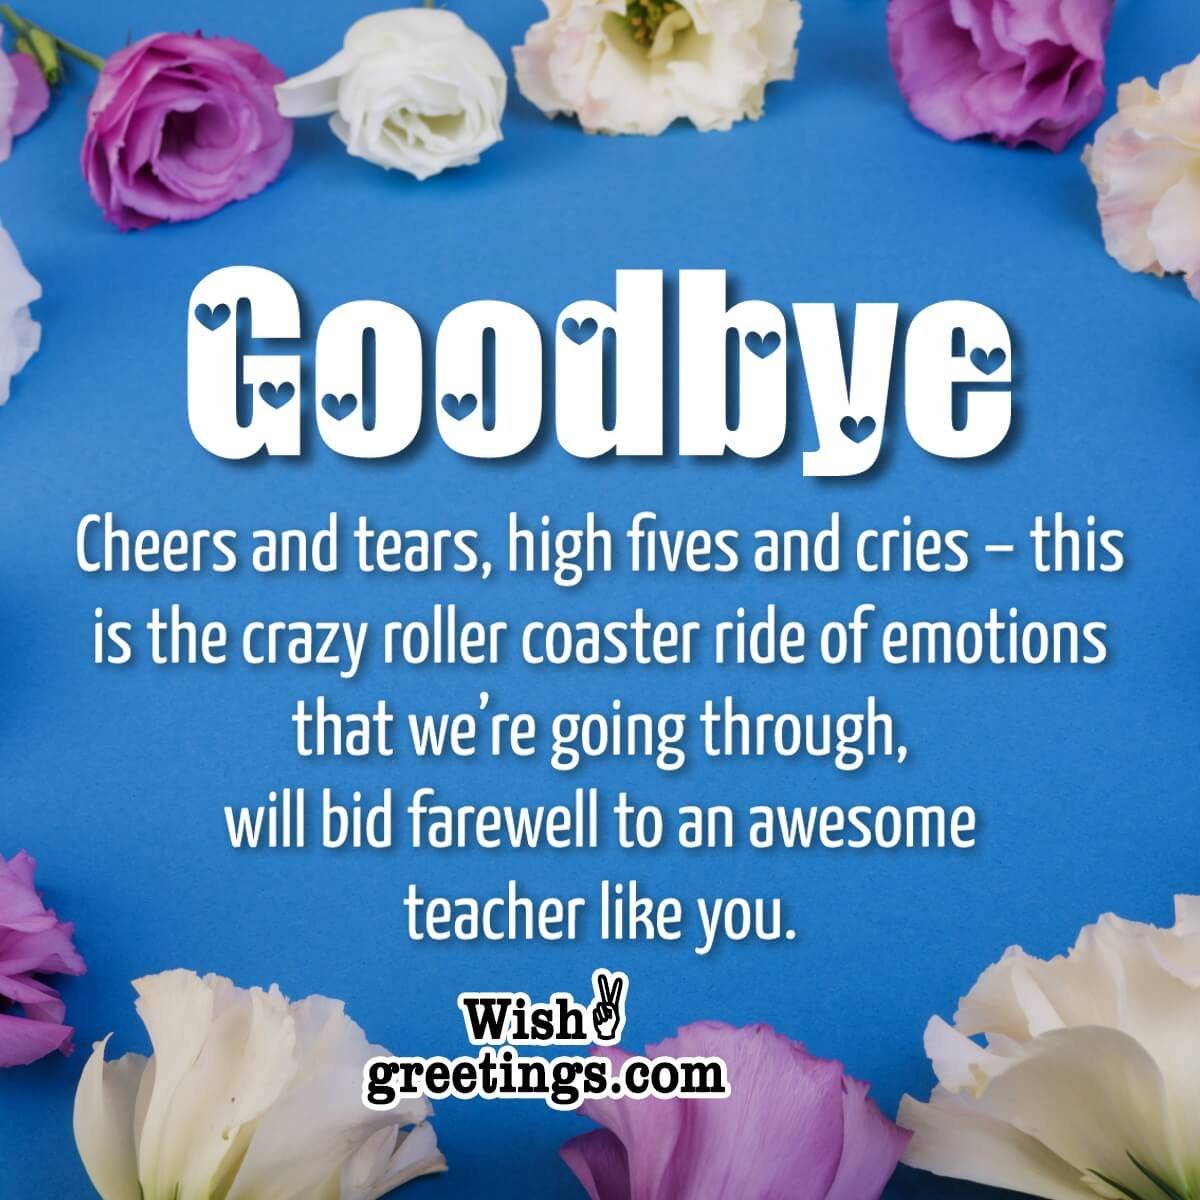 emotional-farewell-messages-for-teacher-wish-greetings